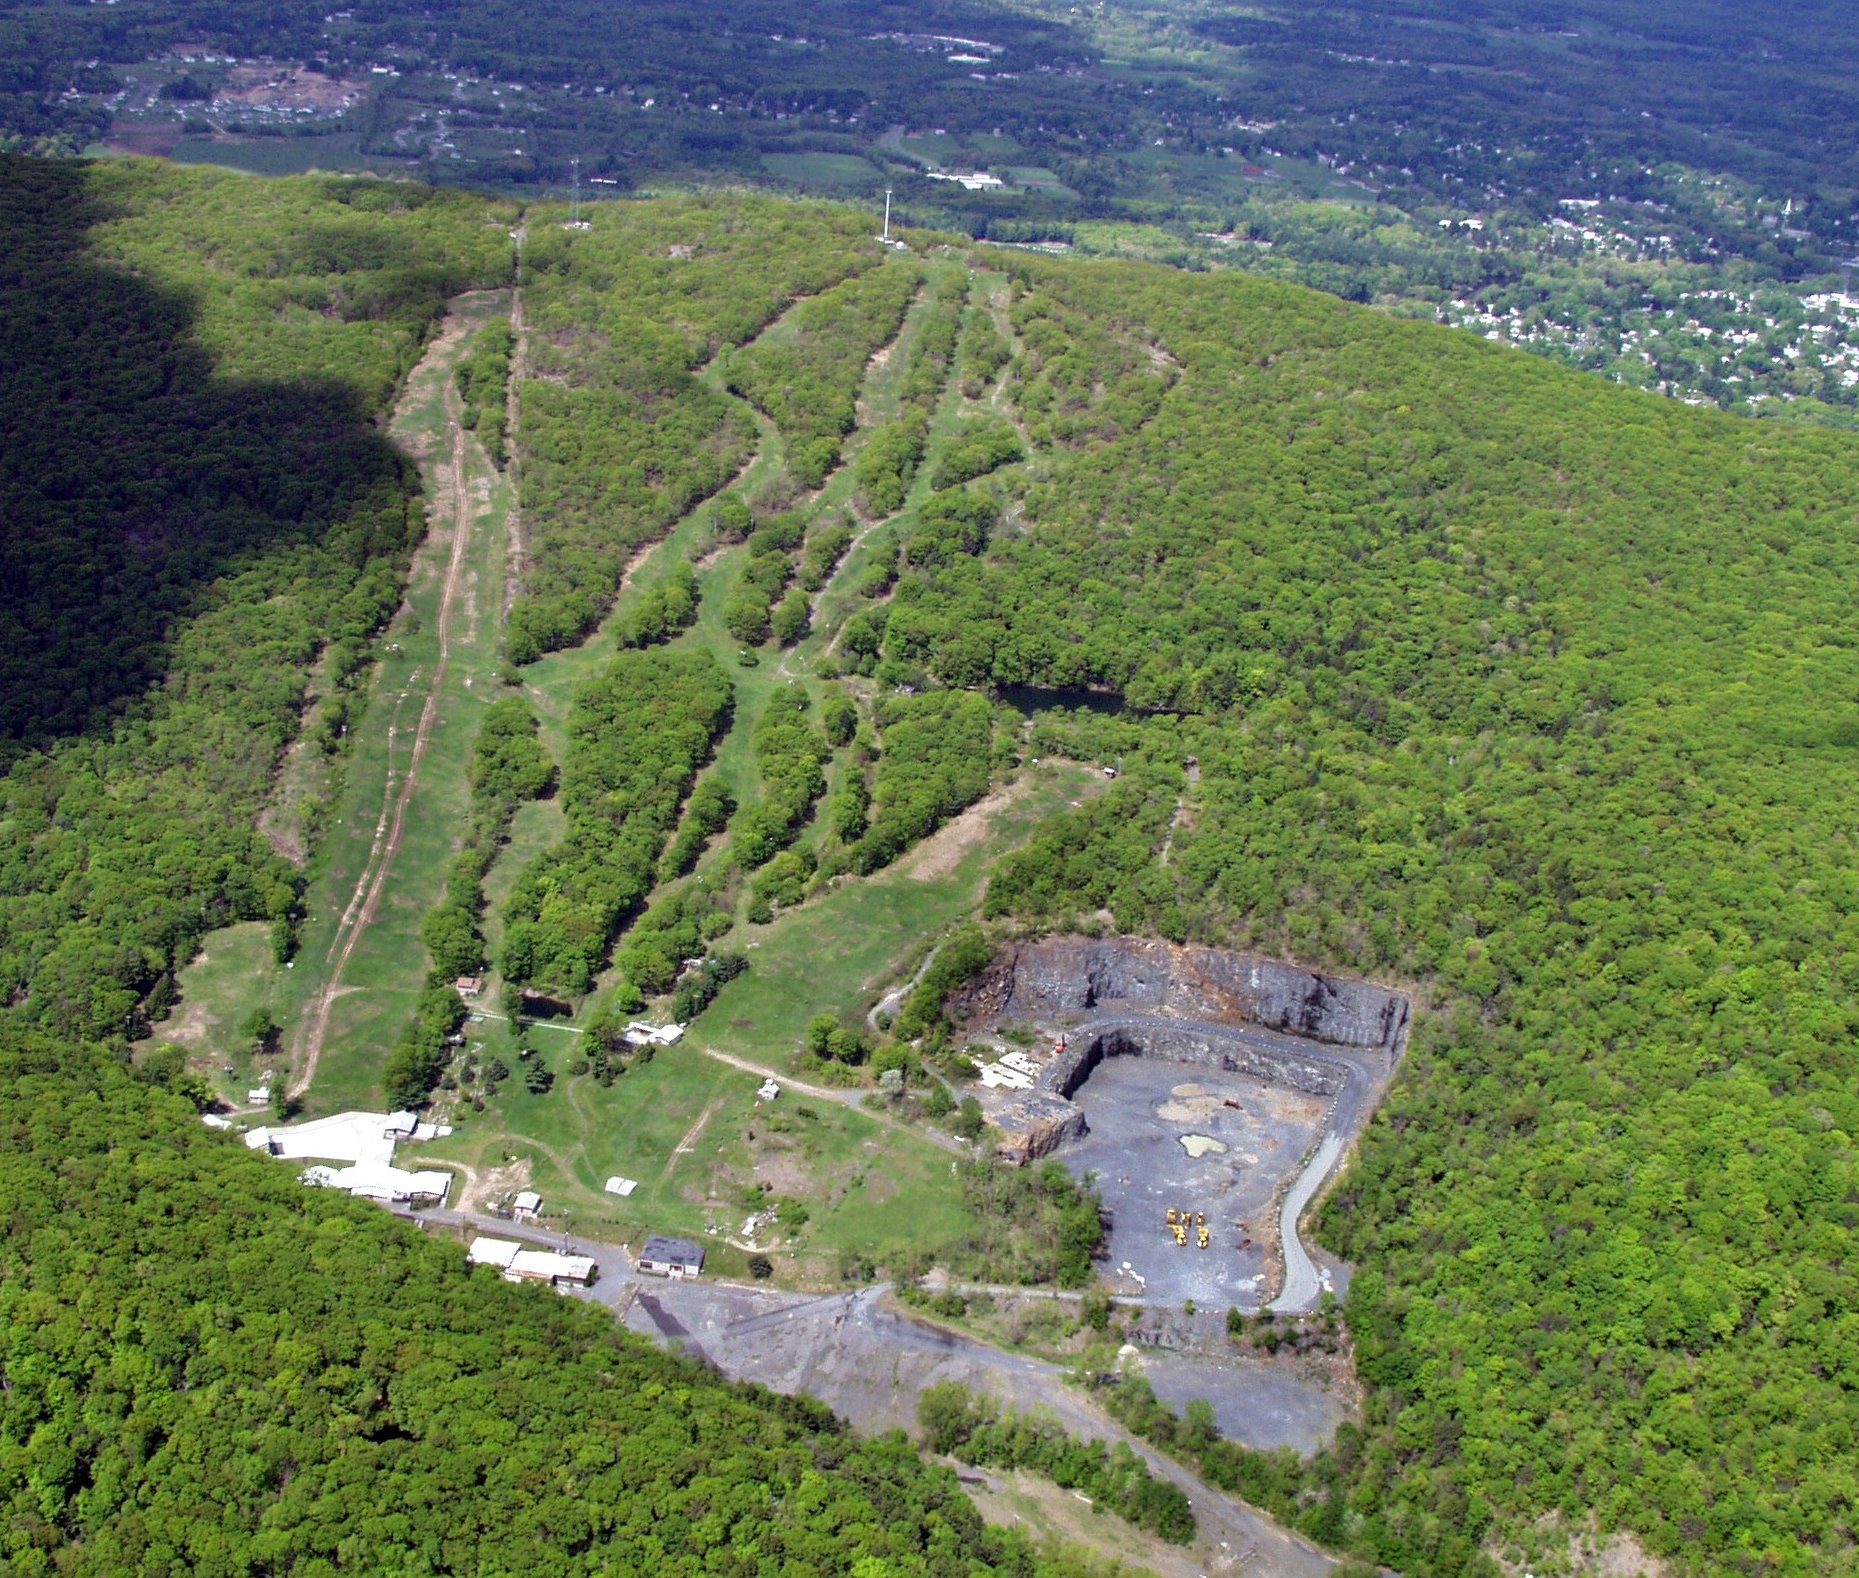 An aerial photo taken in May 2002, shows the sinuous trails of the former Mount Tom Ski Area, visible four years after the Holyoke area closed. At lower right is the Mount Tom Quarry.